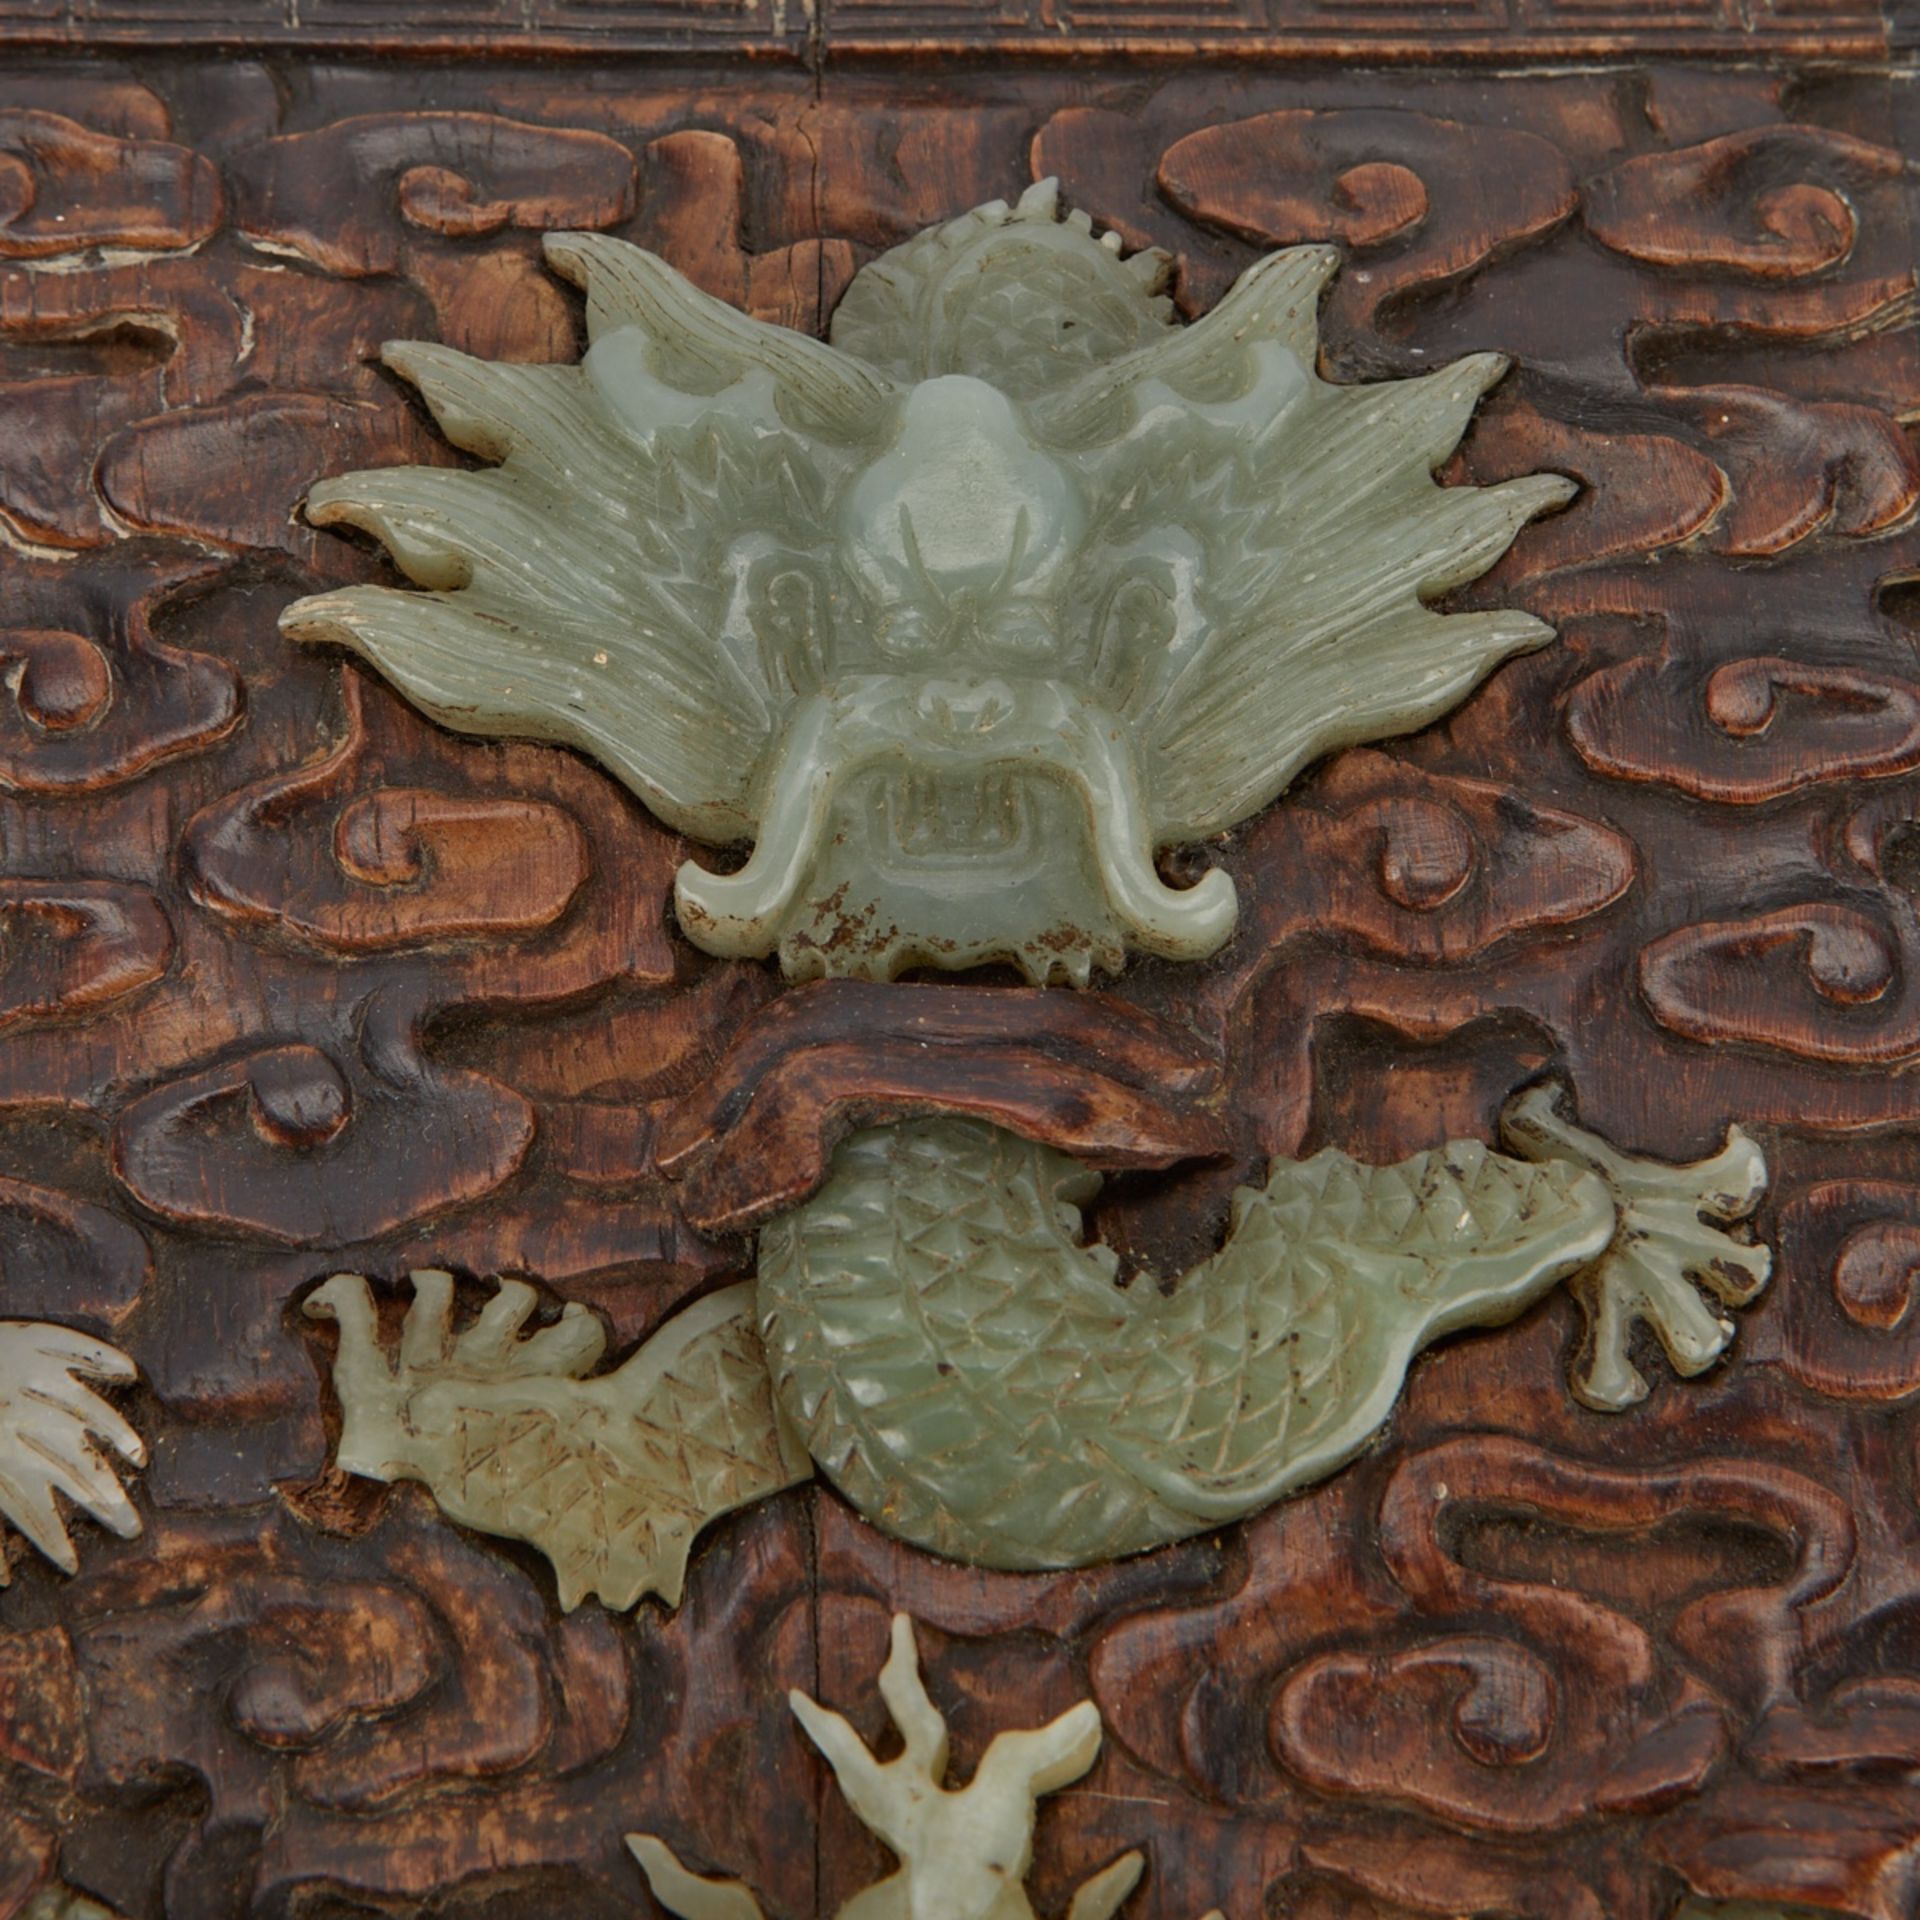 Chinese Seal Chest w/ Inlaid Jade Dragon - Image 2 of 10